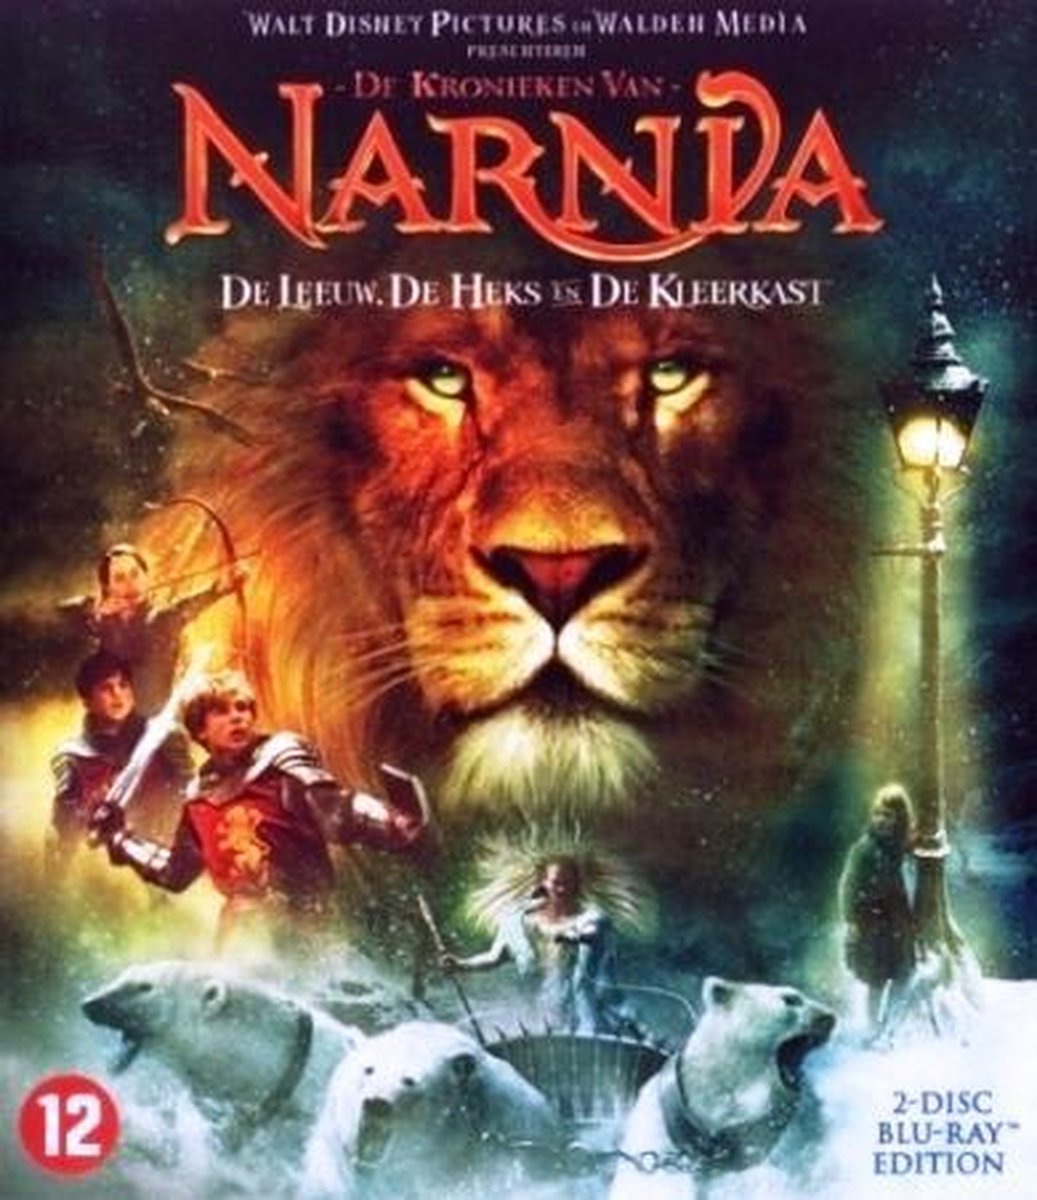 The Chronicles Of Narnia: The Lion, The Witch And The Wardrobe (Blu-ray) - 